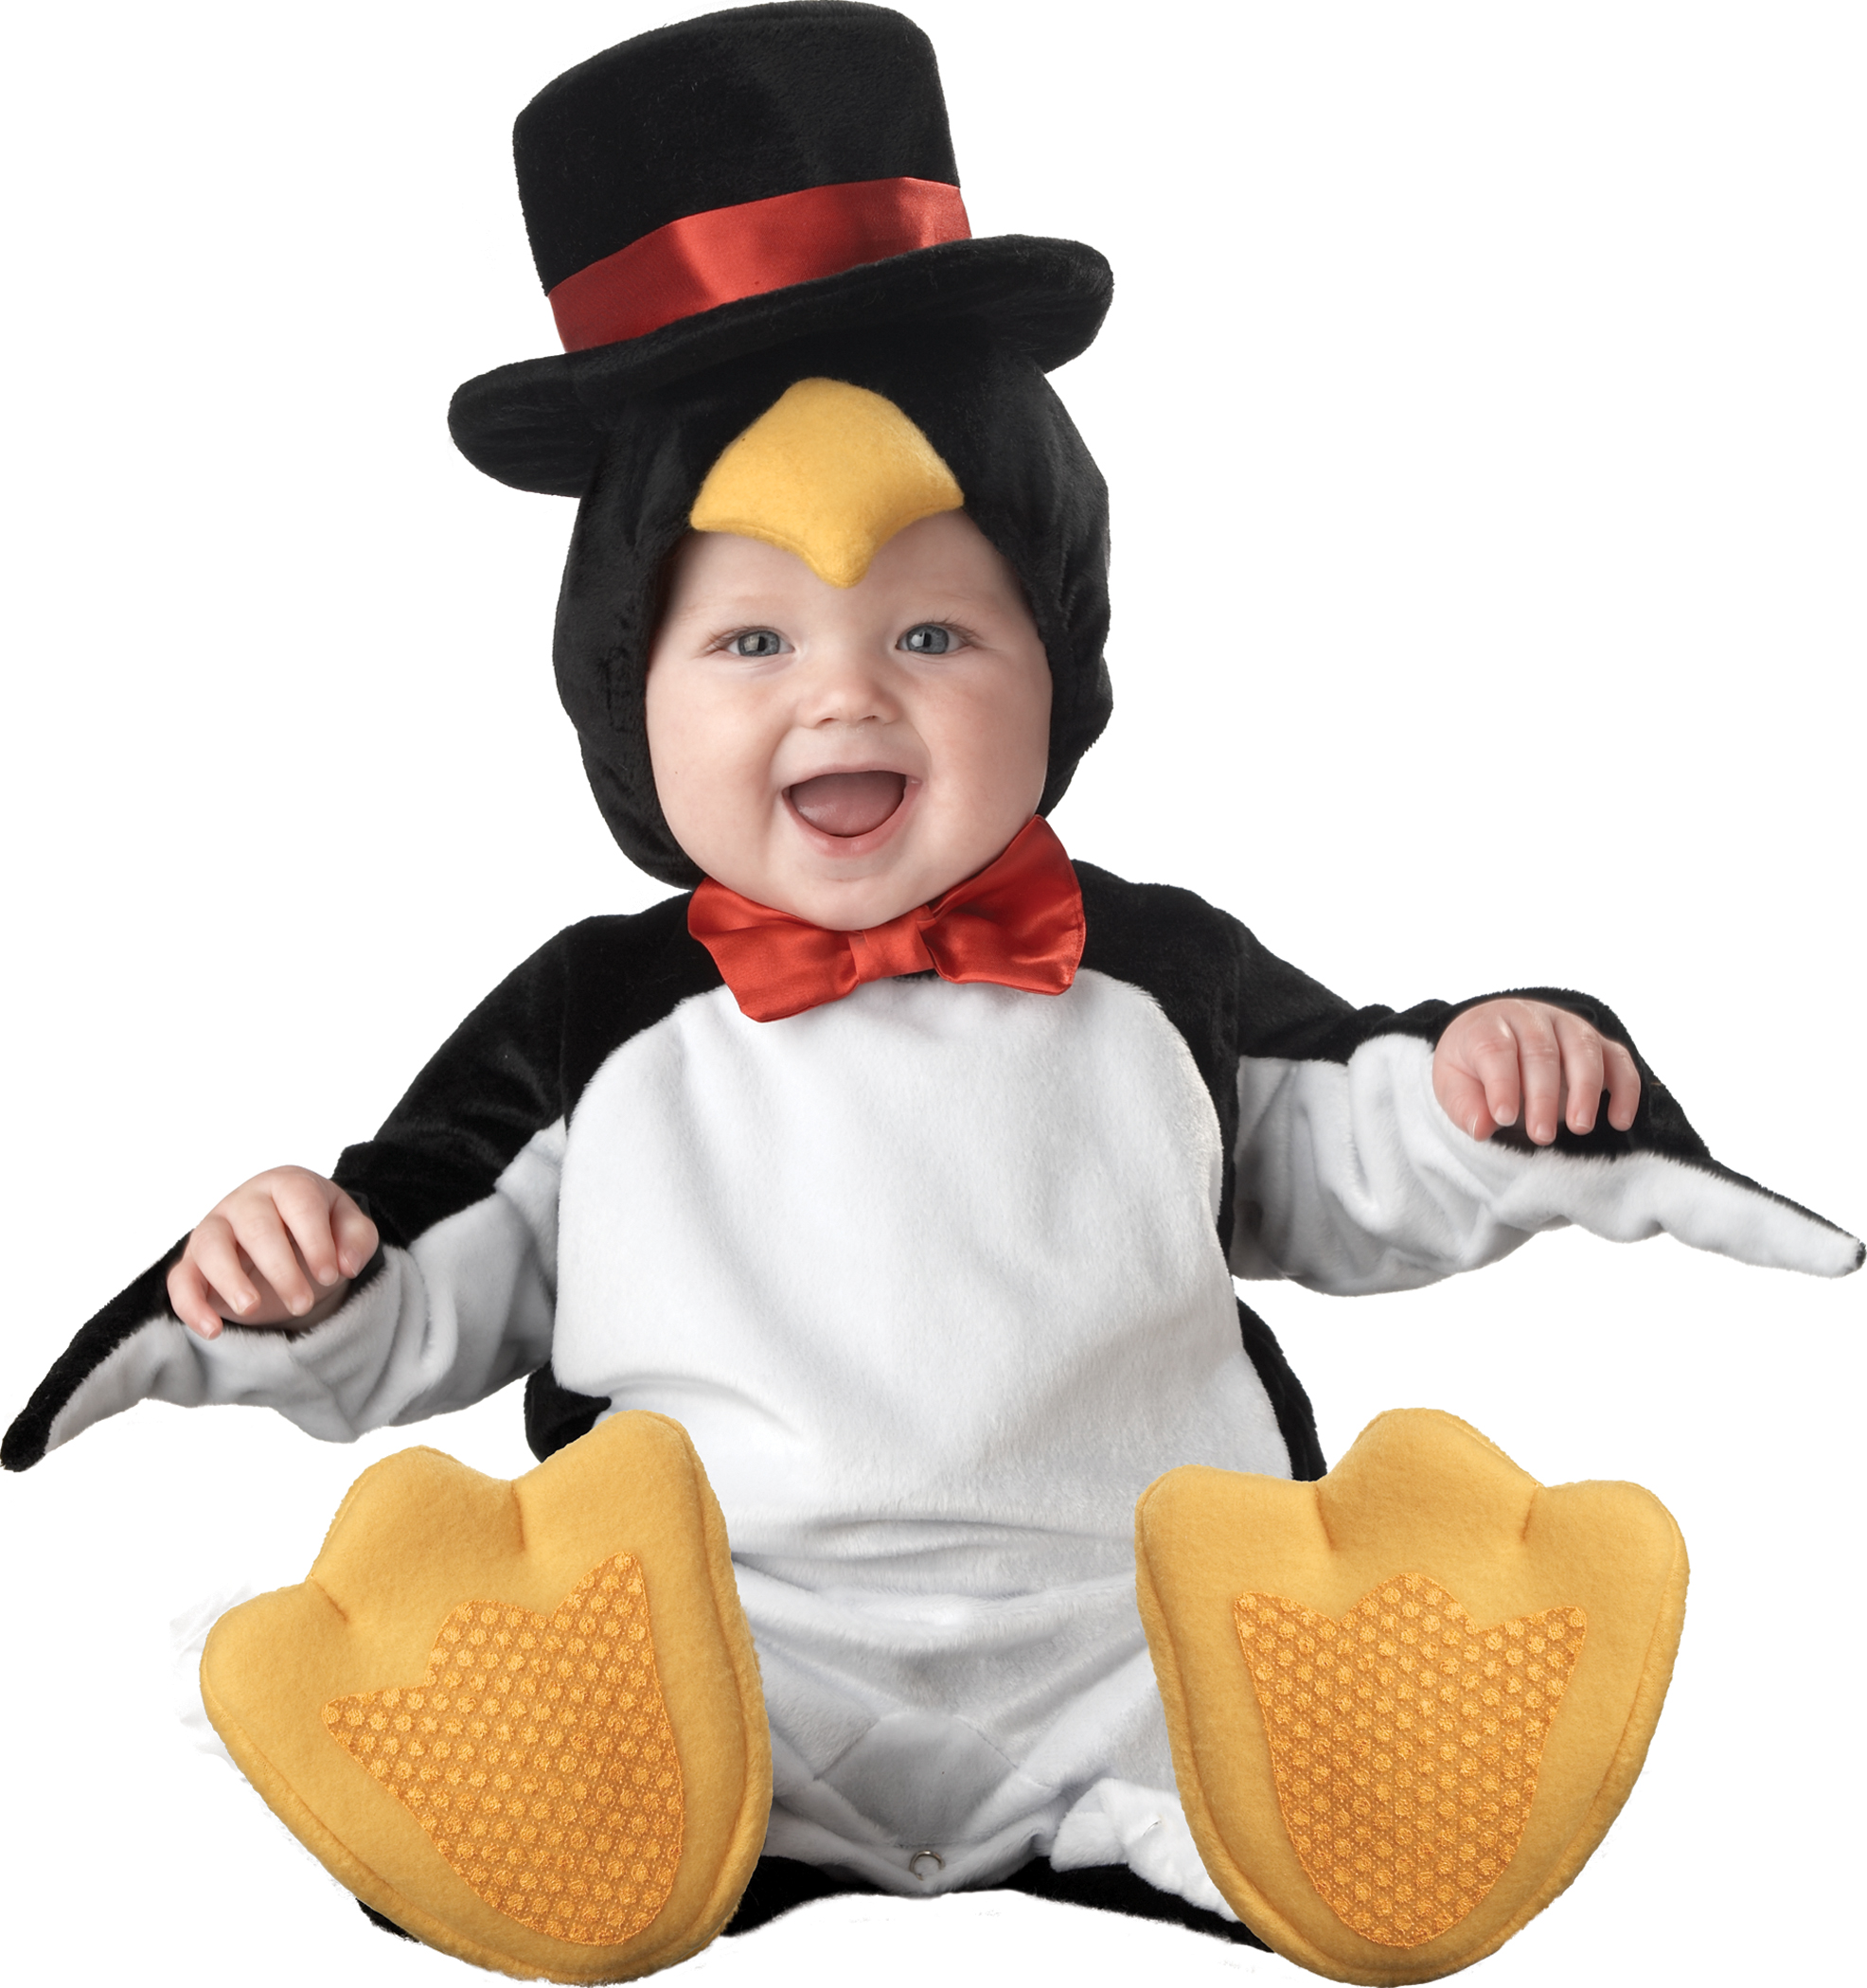 In Character LIL' PENGUIN